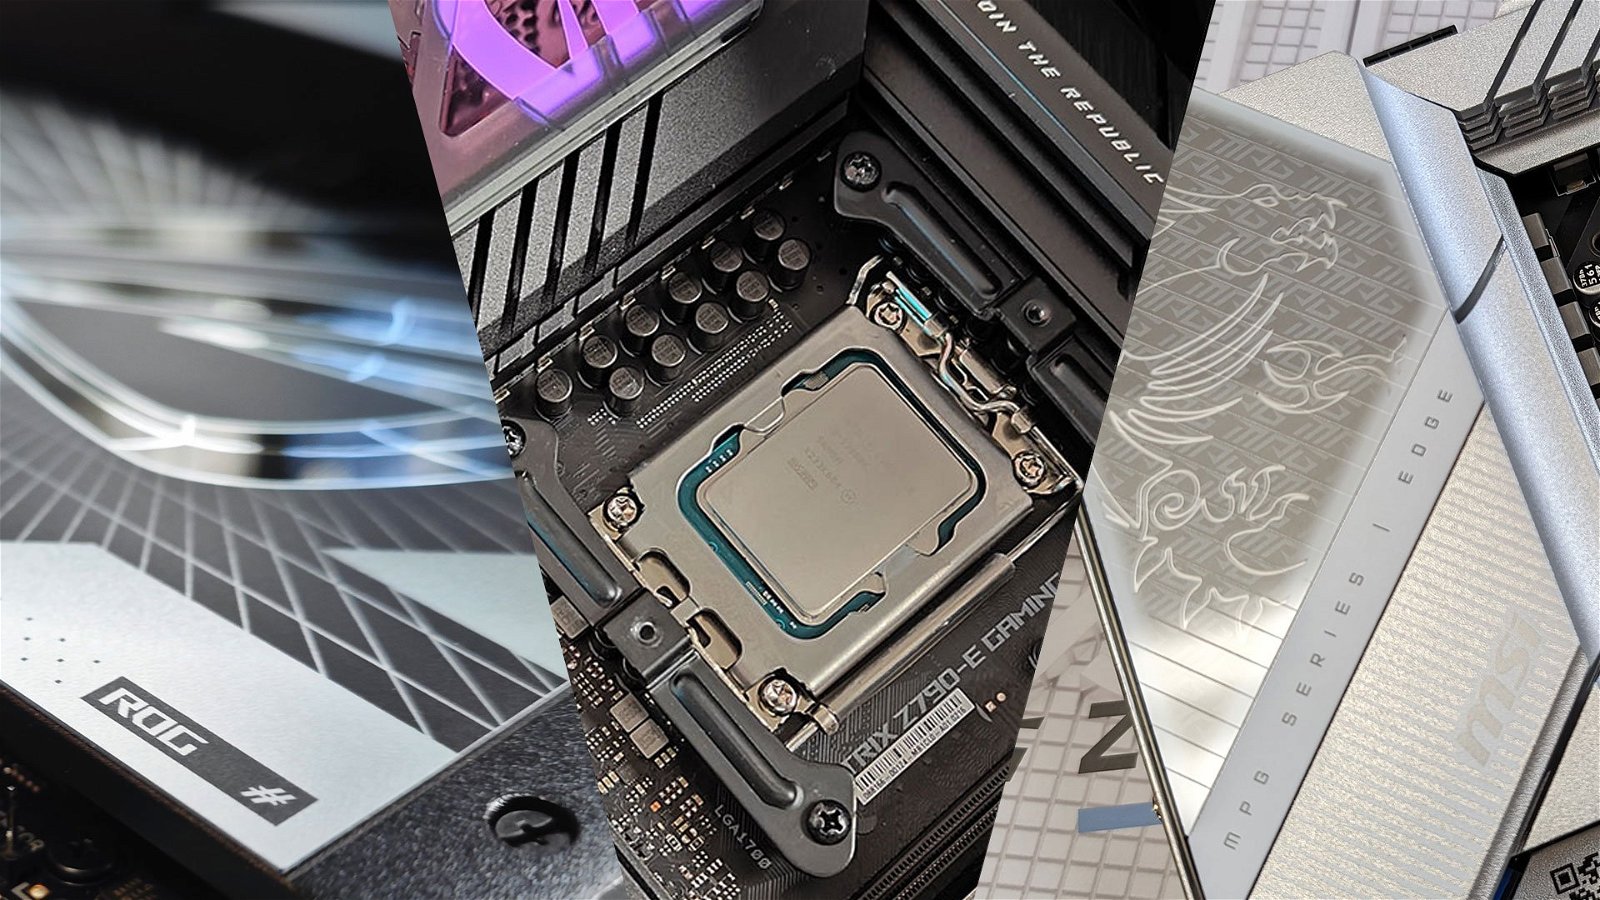 Best motherboard for Core i9 14900K – high-end, gaming, and overclocking -  PC Guide